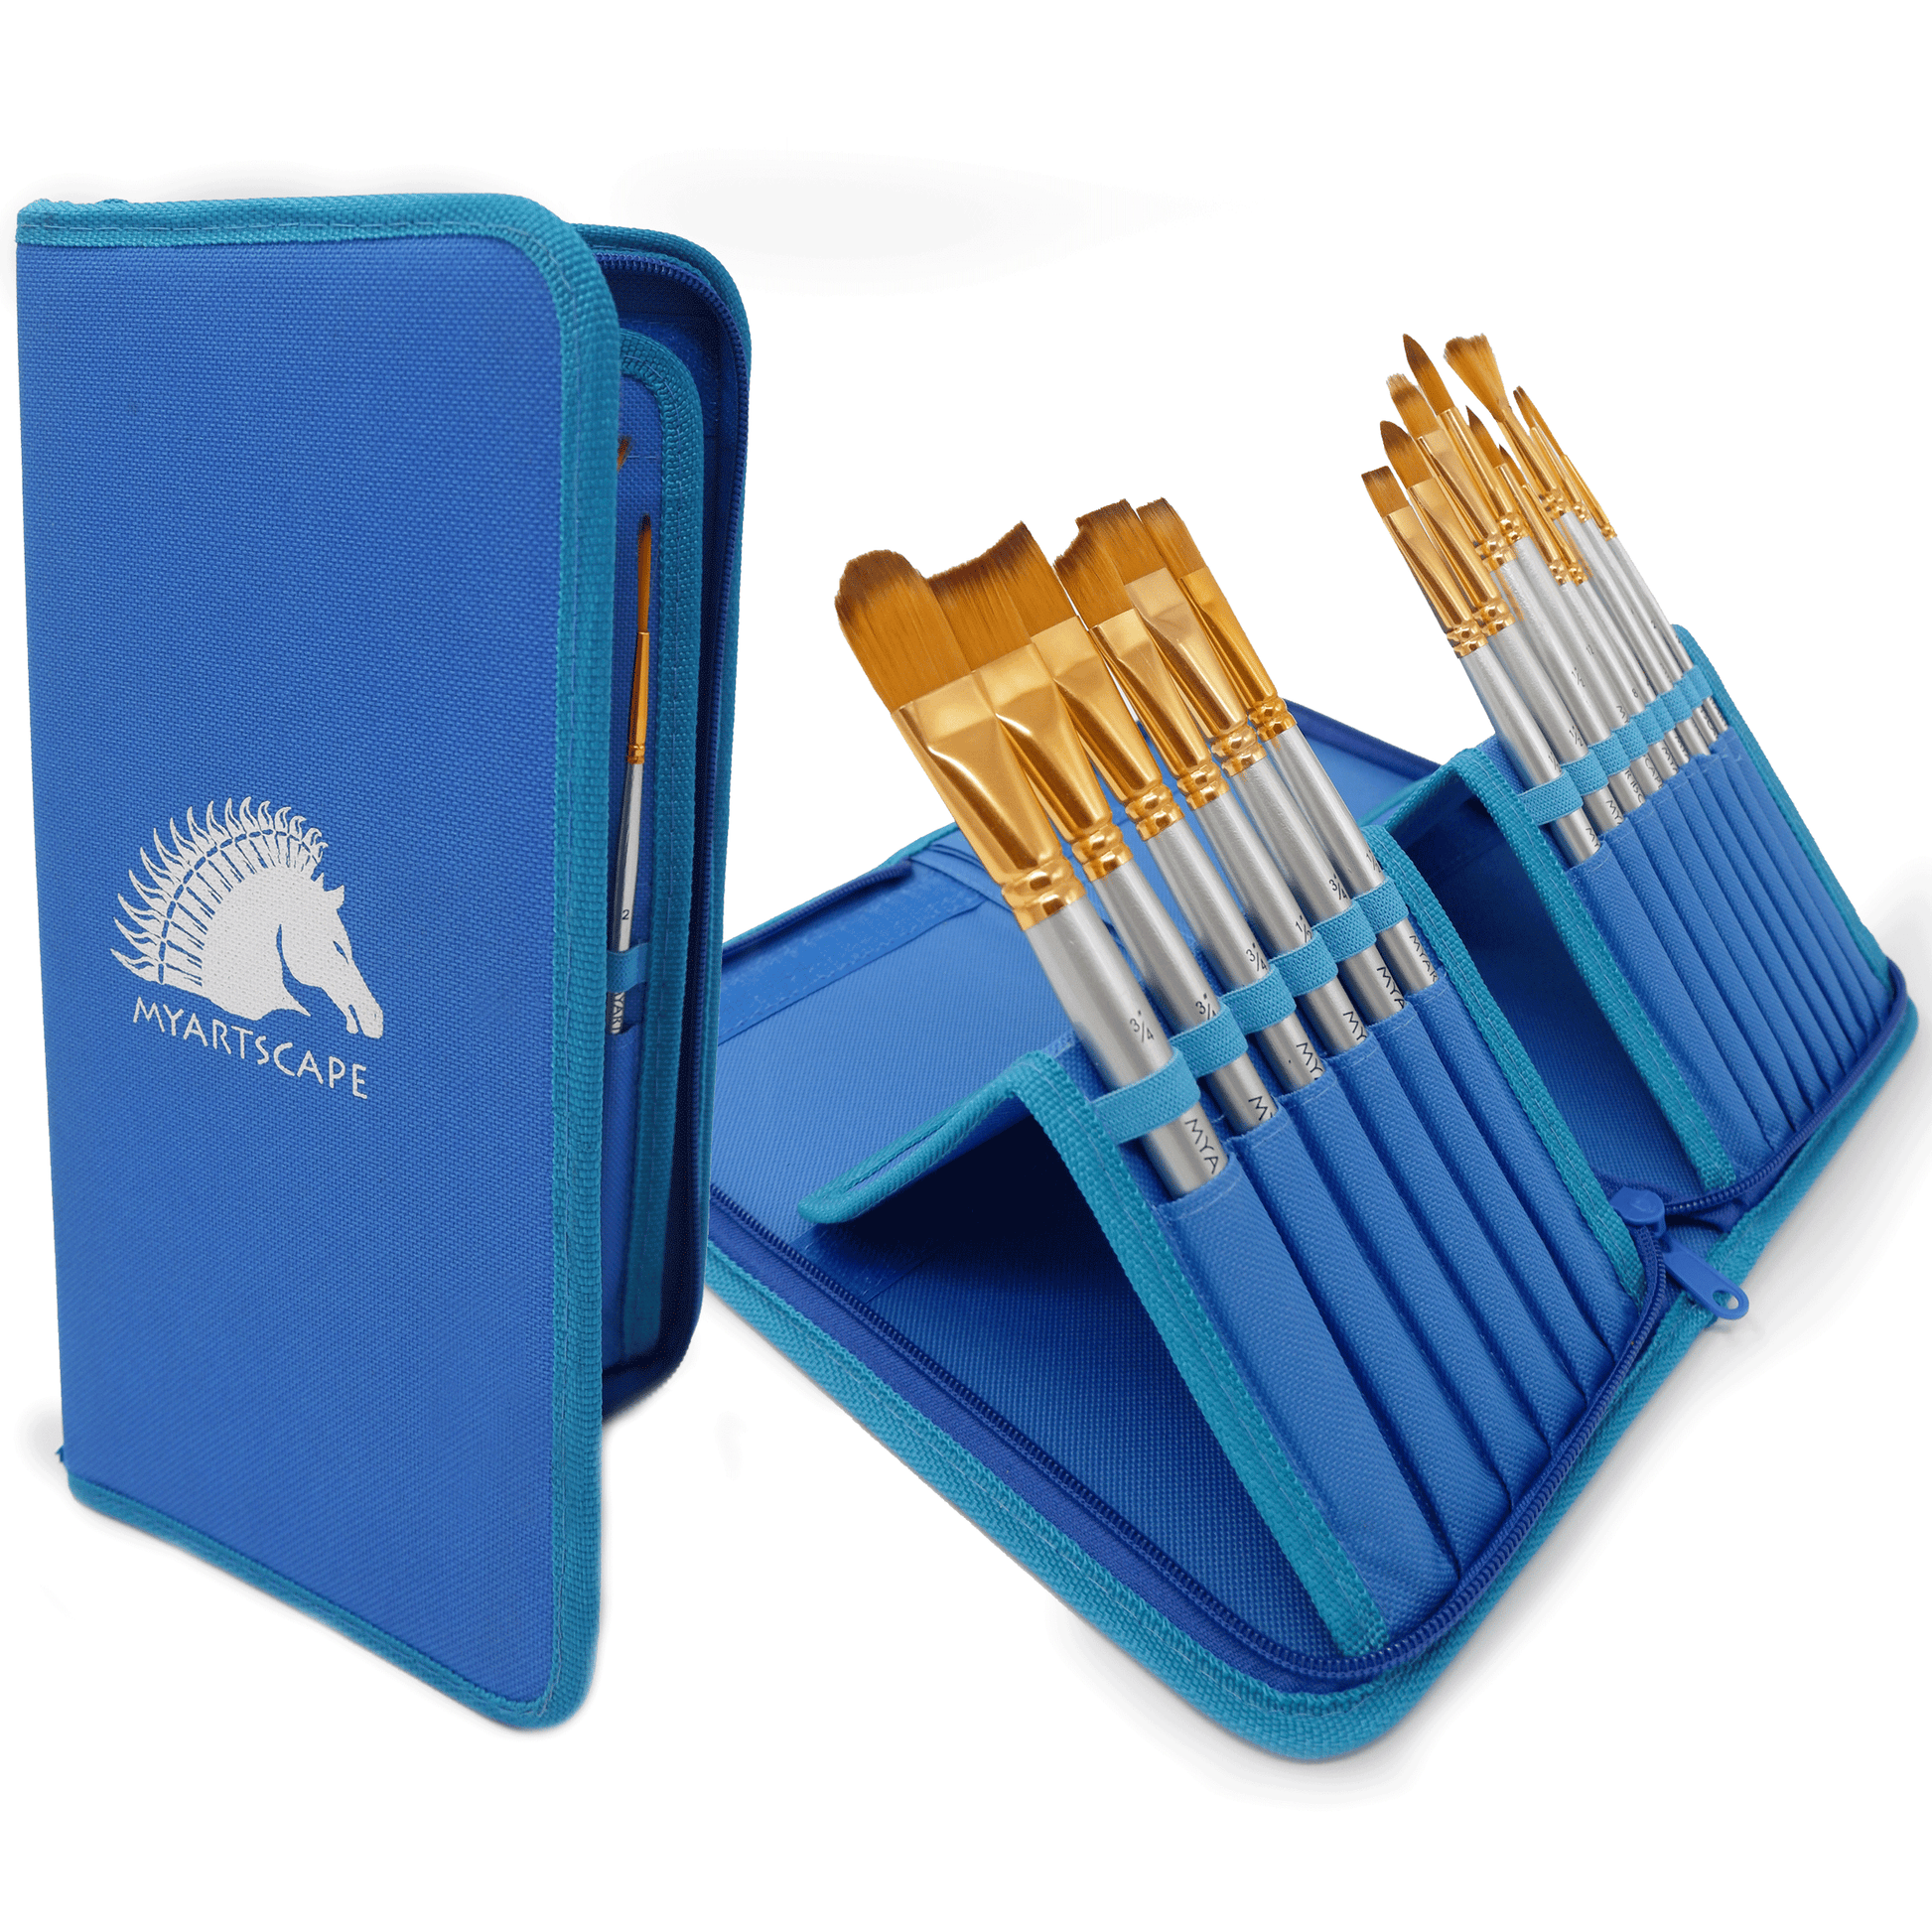 Create Art On-the-Go with the 15 Pc Short Handle Paintbrush Set